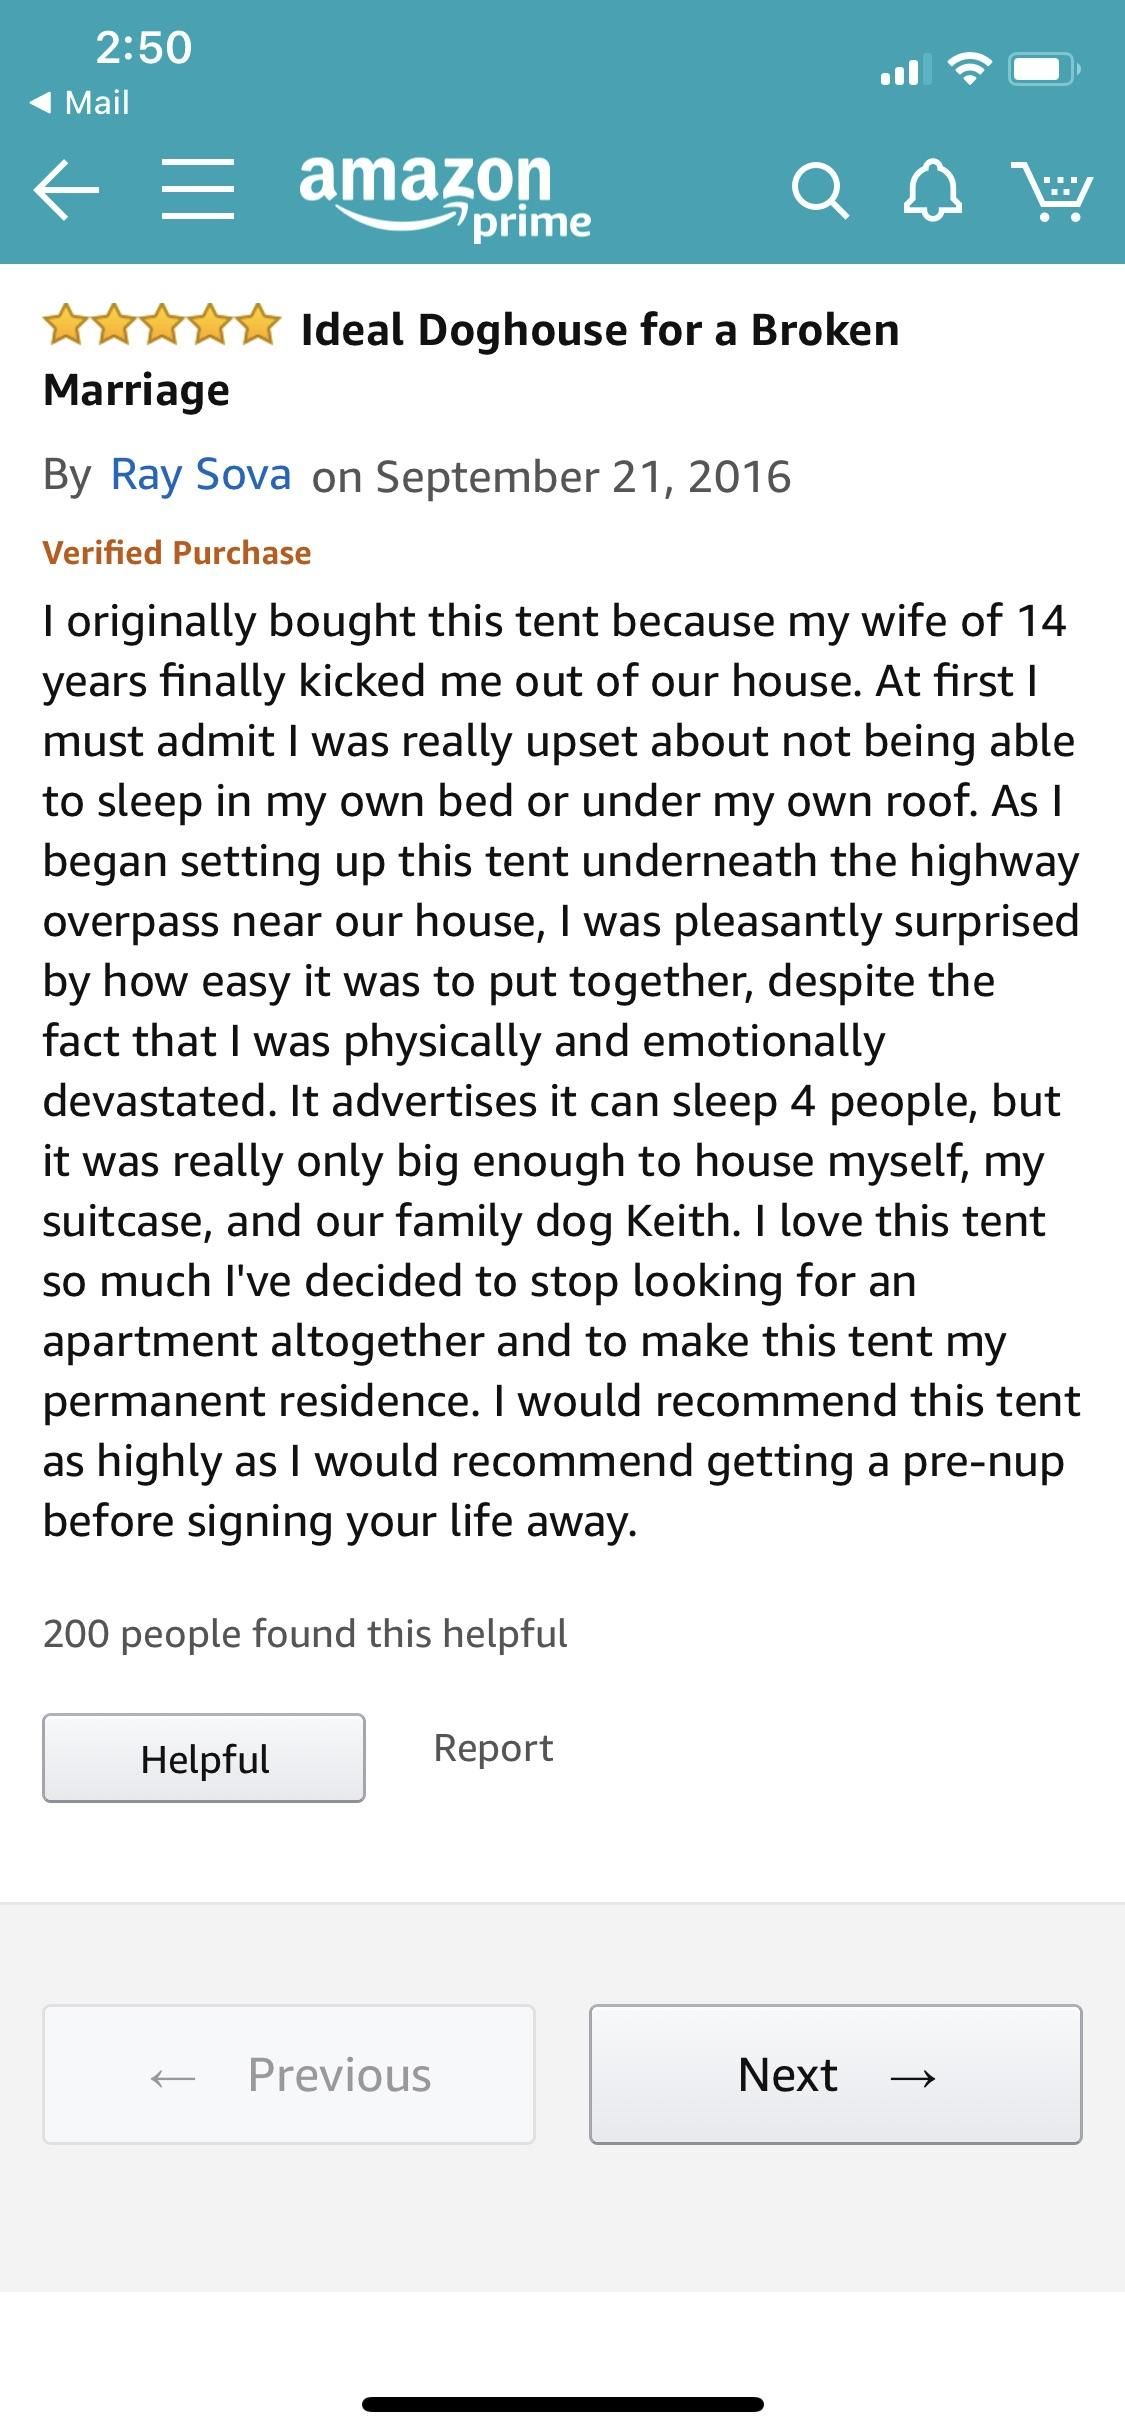 This review swayed our decision to buy this tent.